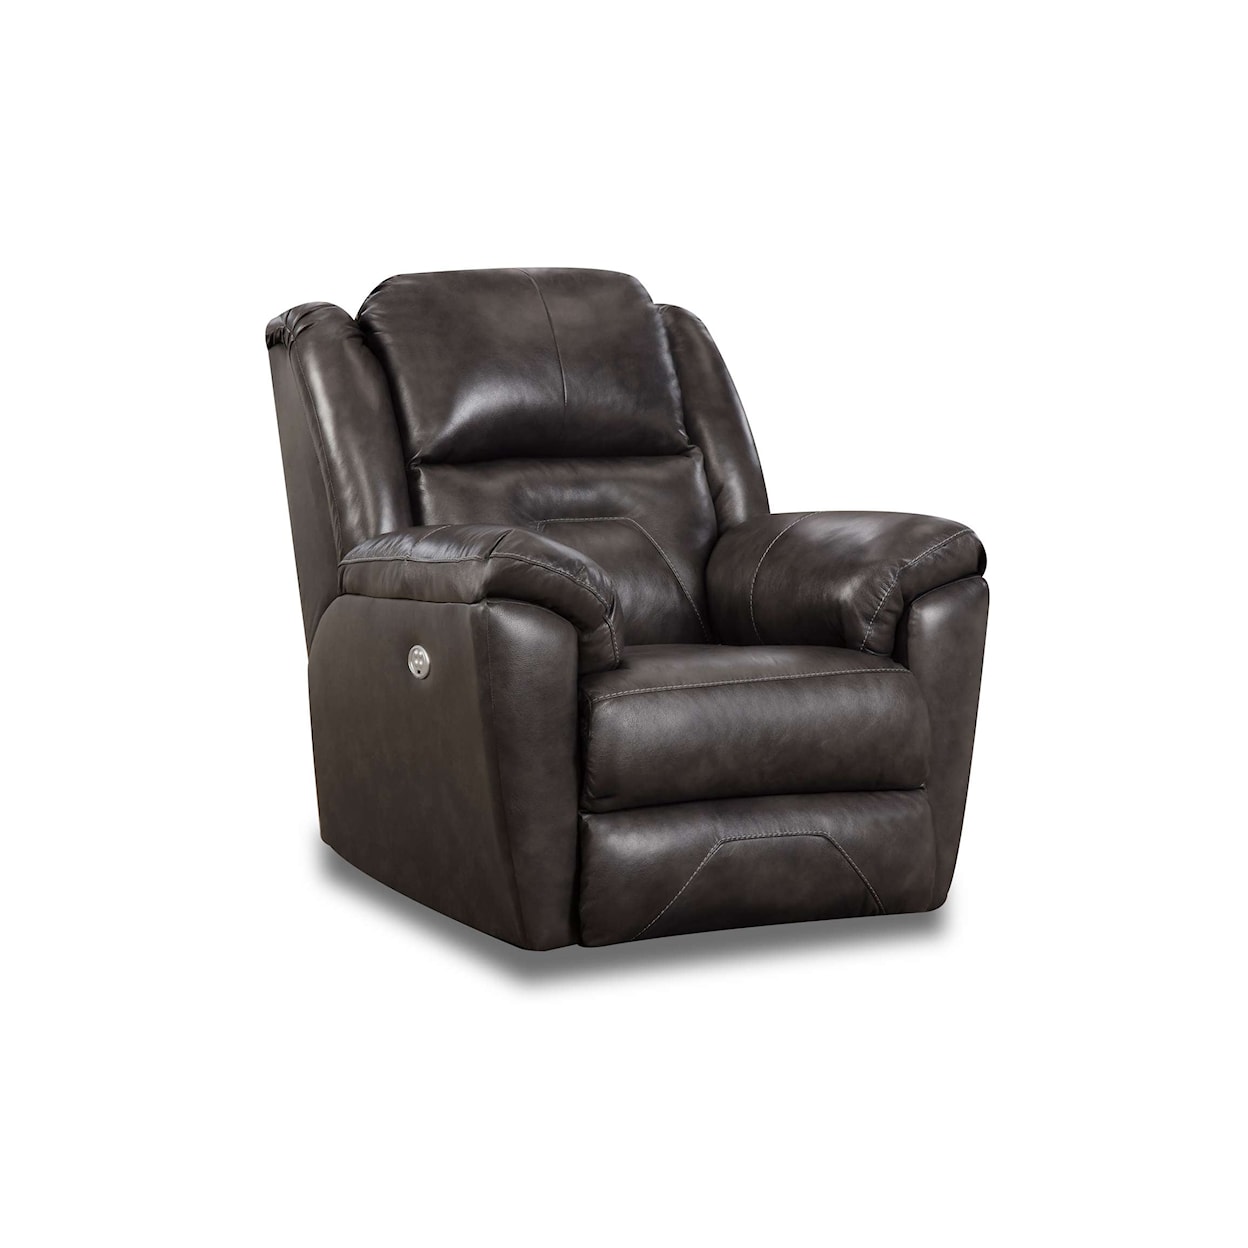 Southern Motion Southern Motion Pandora Wall Recliner with Power Headrest